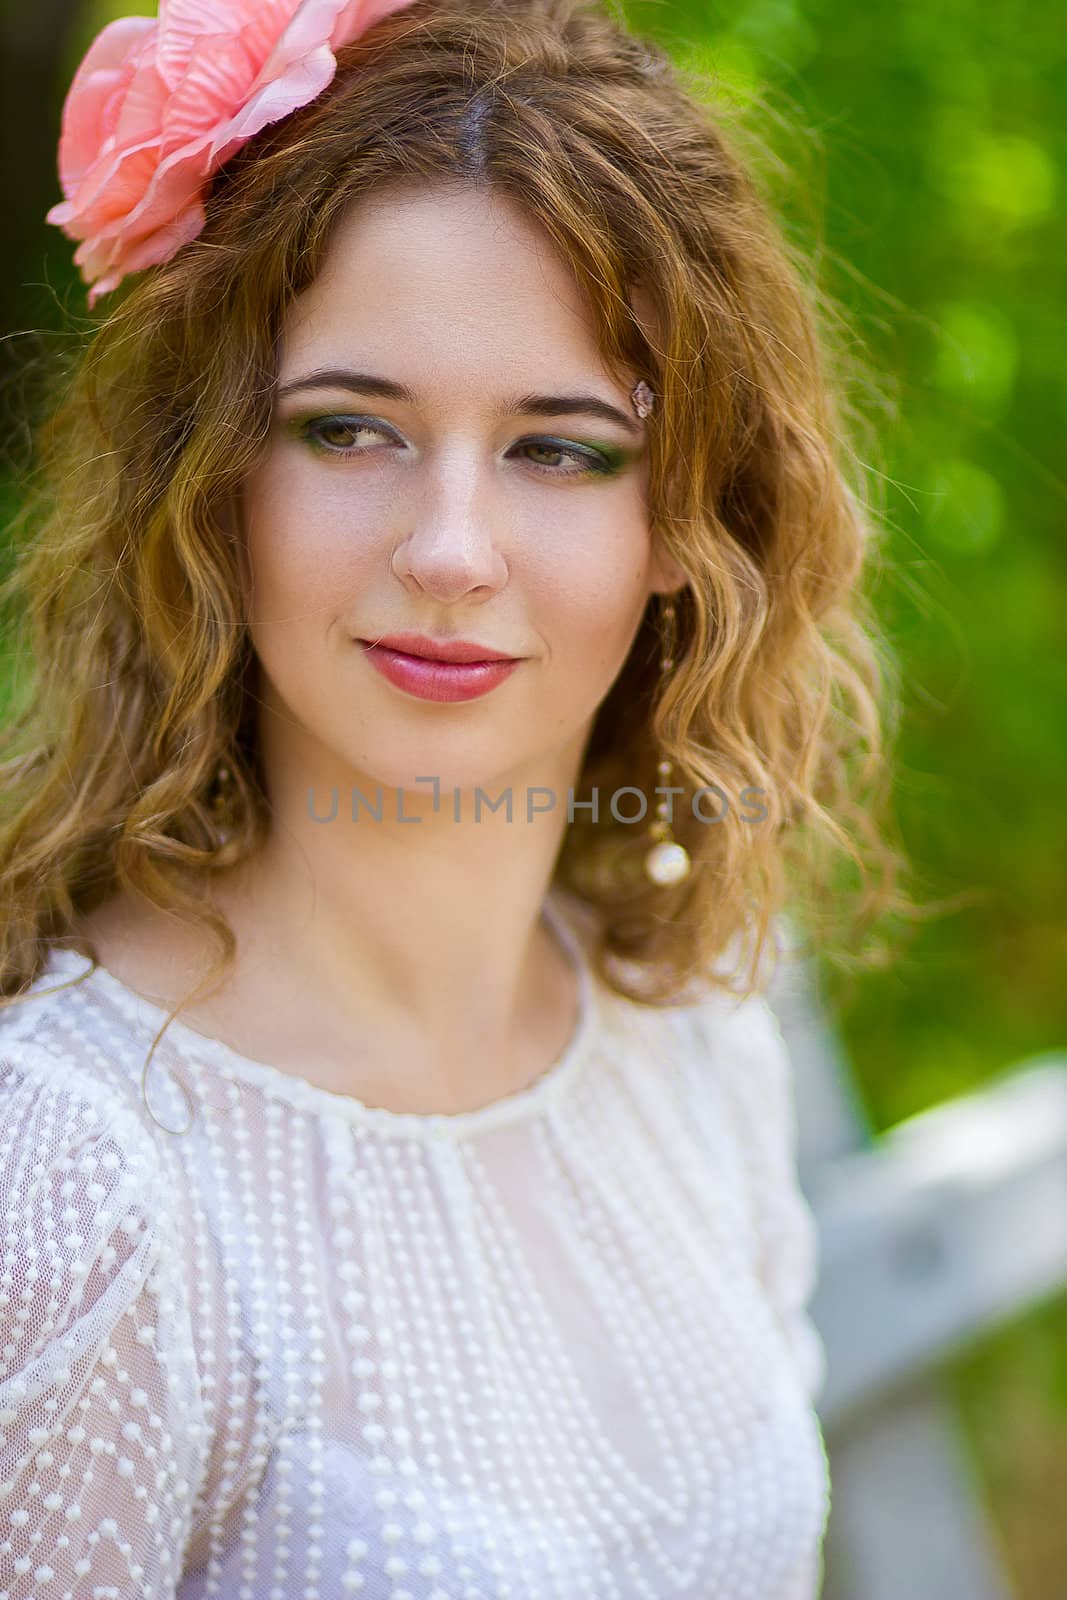 Portrait of a beautiful young woman with curly hair in a smart suit on nature